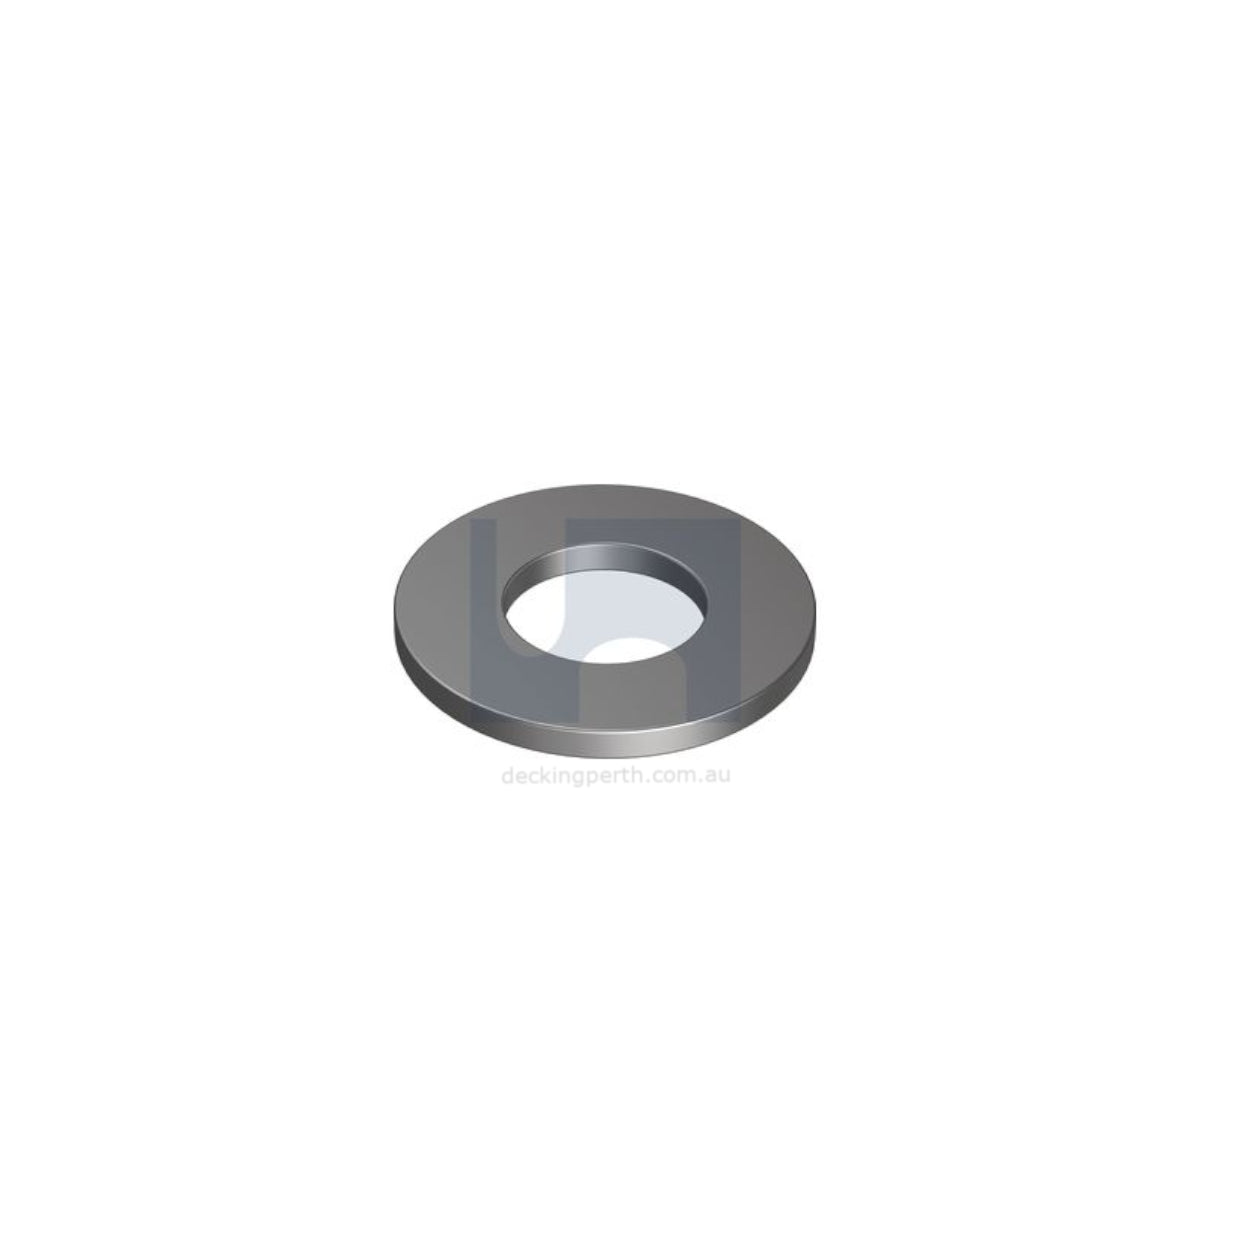 Hobson_304_Stainless_Steel_M8_x_16_Washers_Decking_Perth_1